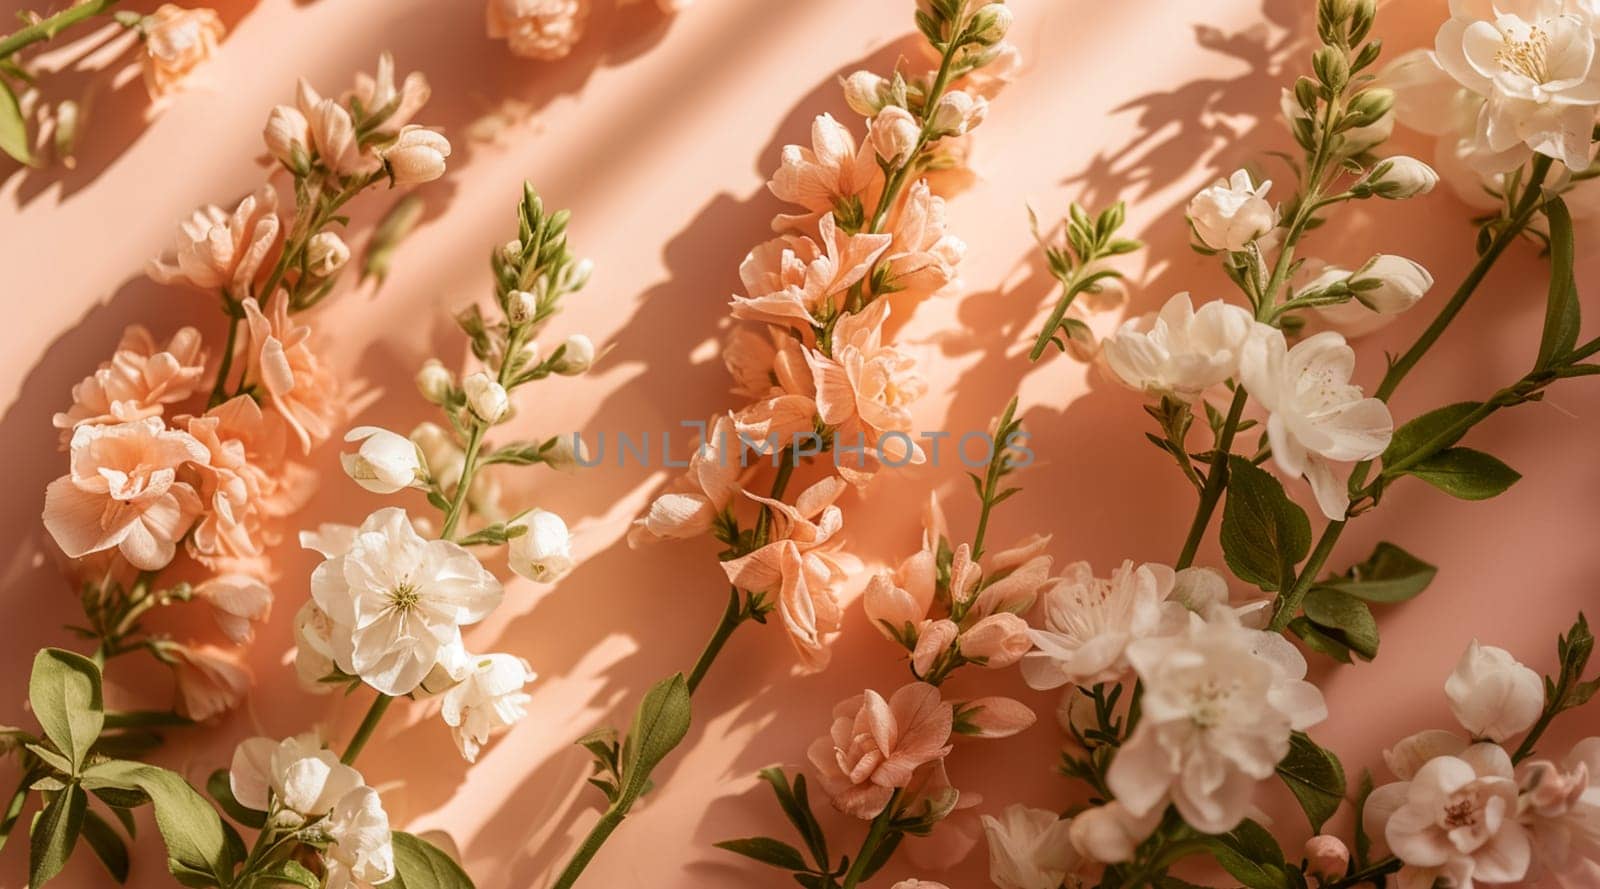 Flowers on a peach background. Spring floral flat lay background by kizuneko